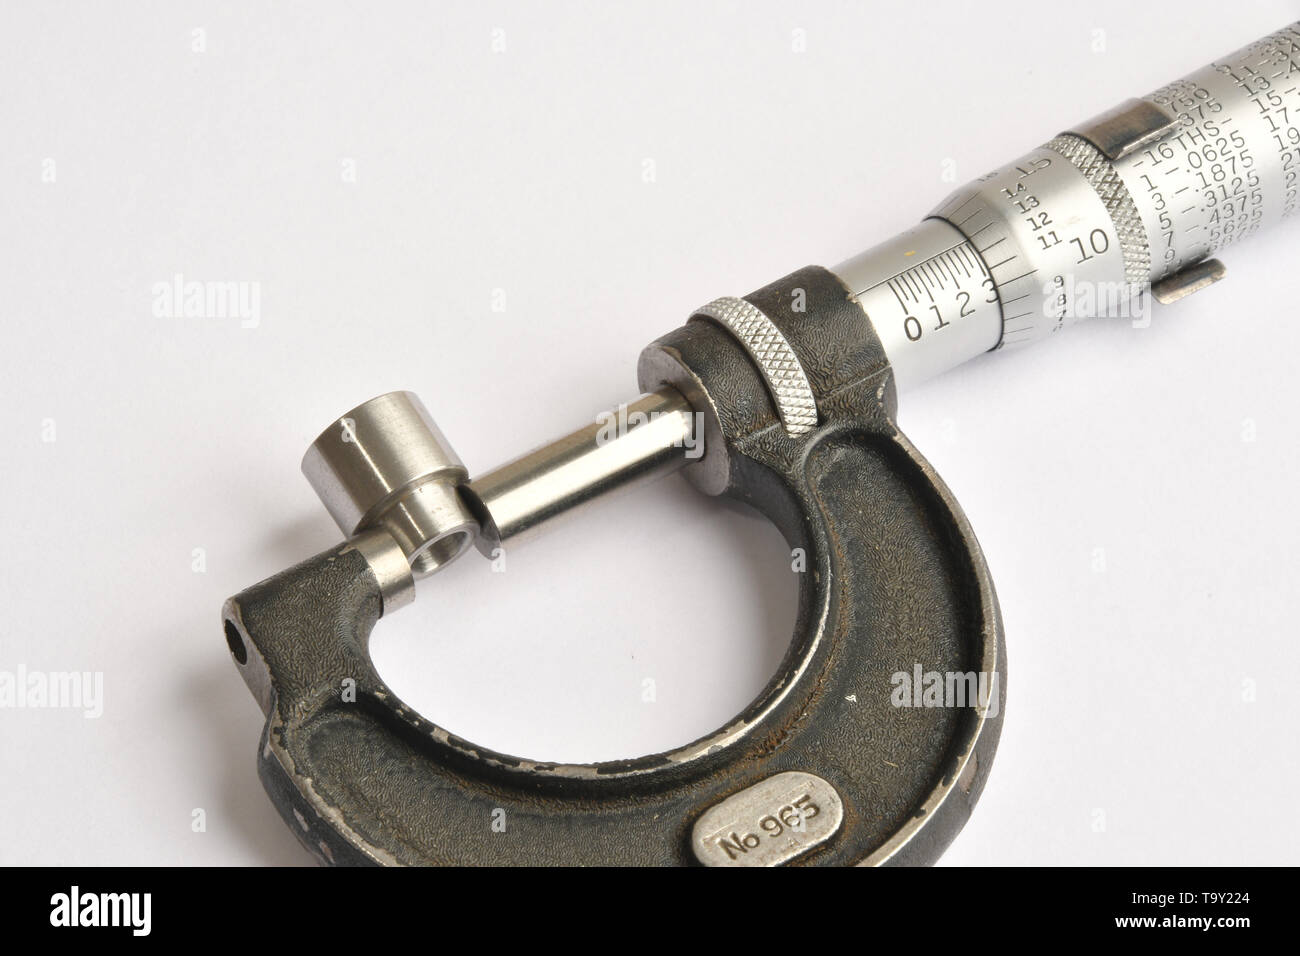 Manual micrometer 0-1.0'measuring the diameter of a turned steel component. Stock Photo